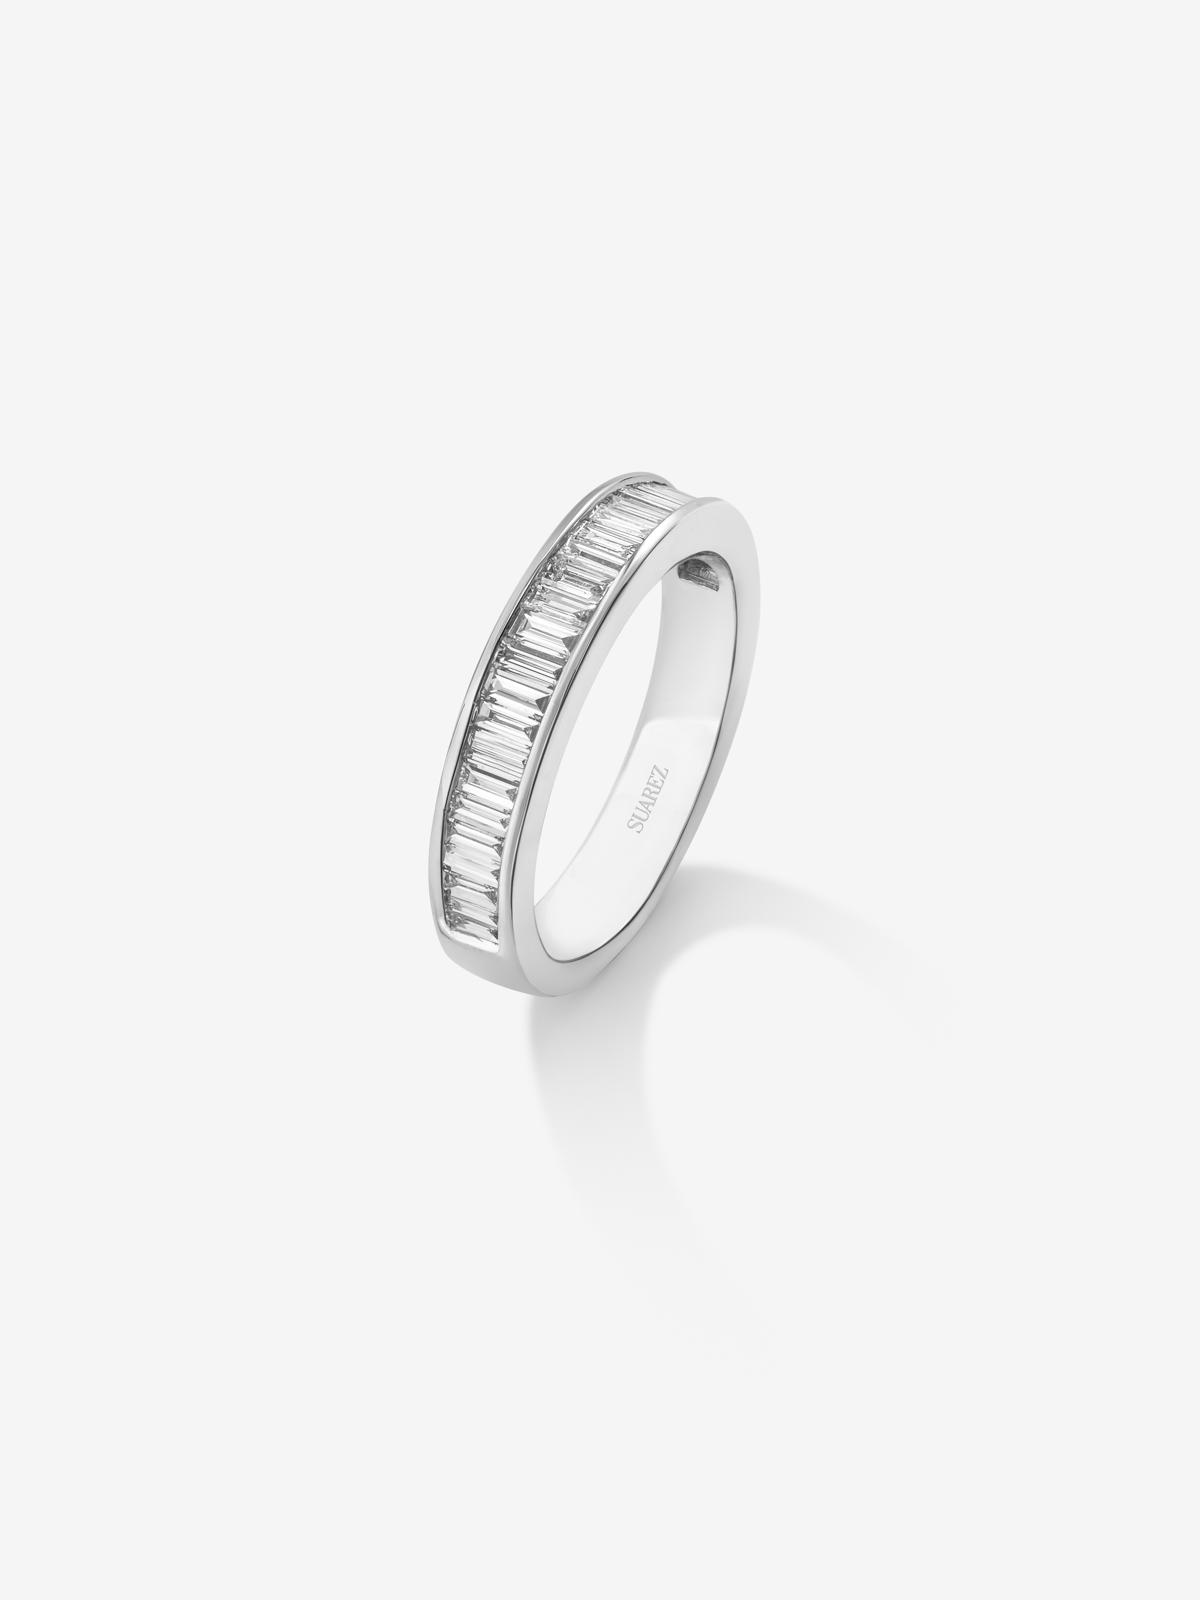 Half-eternity engagement ring made of 18K white gold with baguette cut diamonds on band 0.77ct.